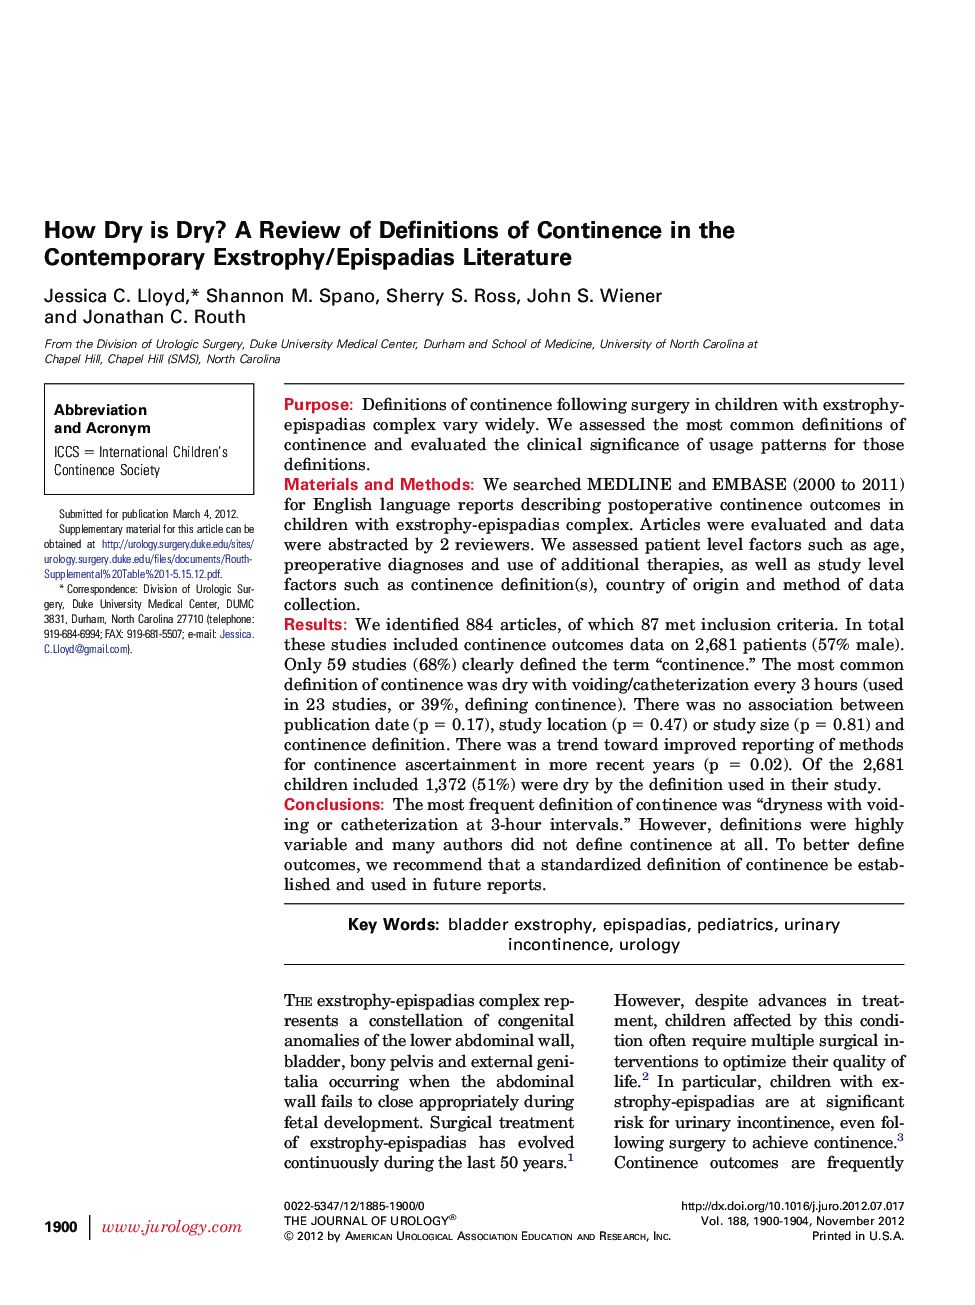 How Dry is Dry? A Review of Definitions of Continence in the Contemporary Exstrophy/Epispadias Literature 